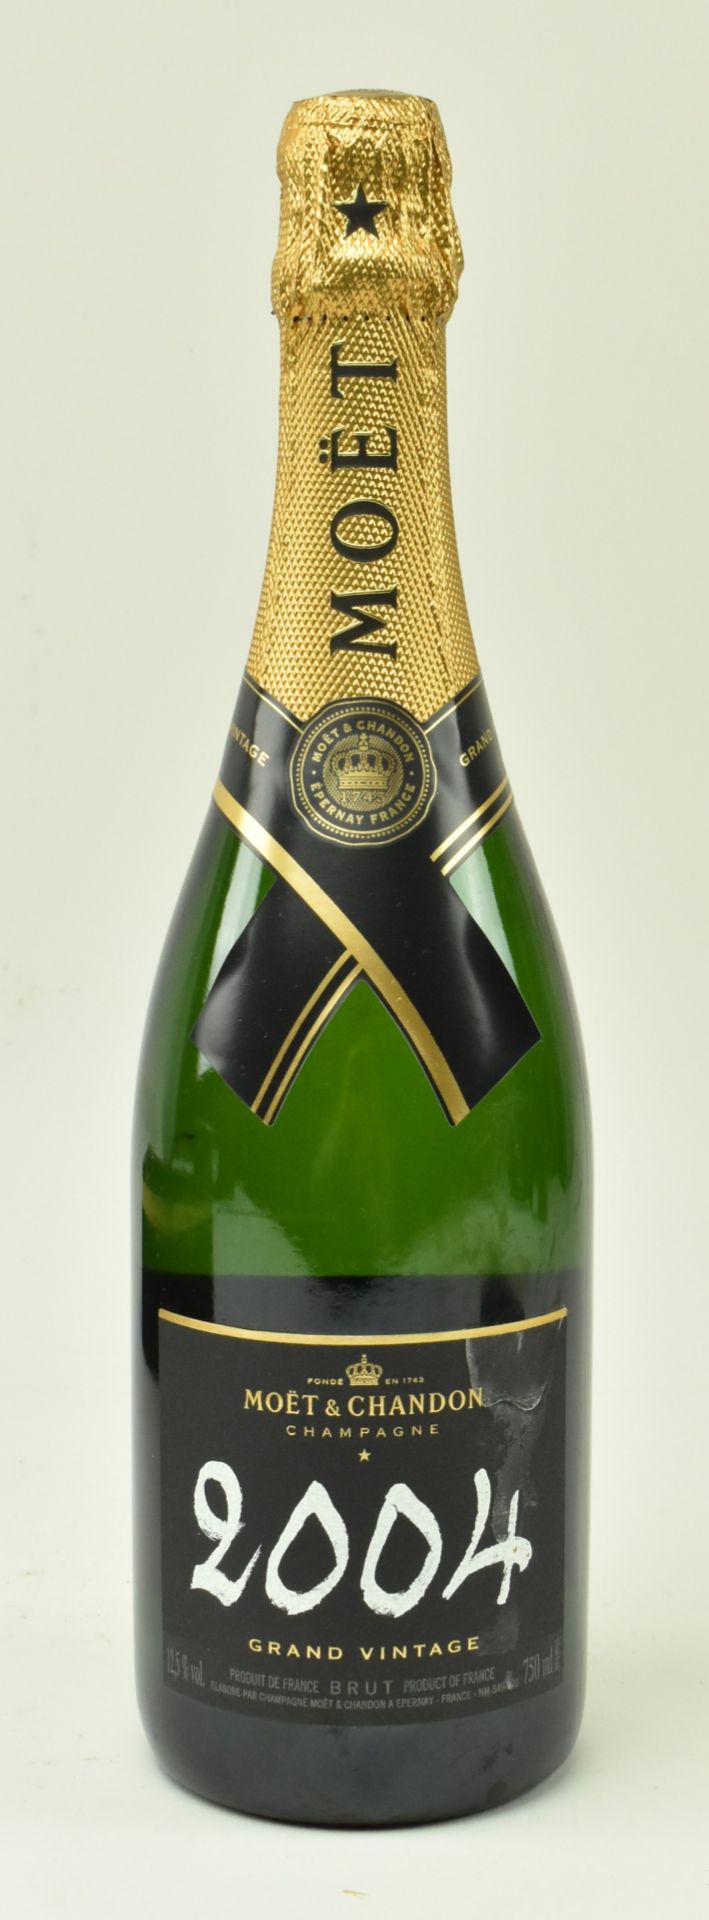 MOET & CHANDON CHAMPAGNE 2004 GRAND VINTAGE, BOXED - Image 2 of 9